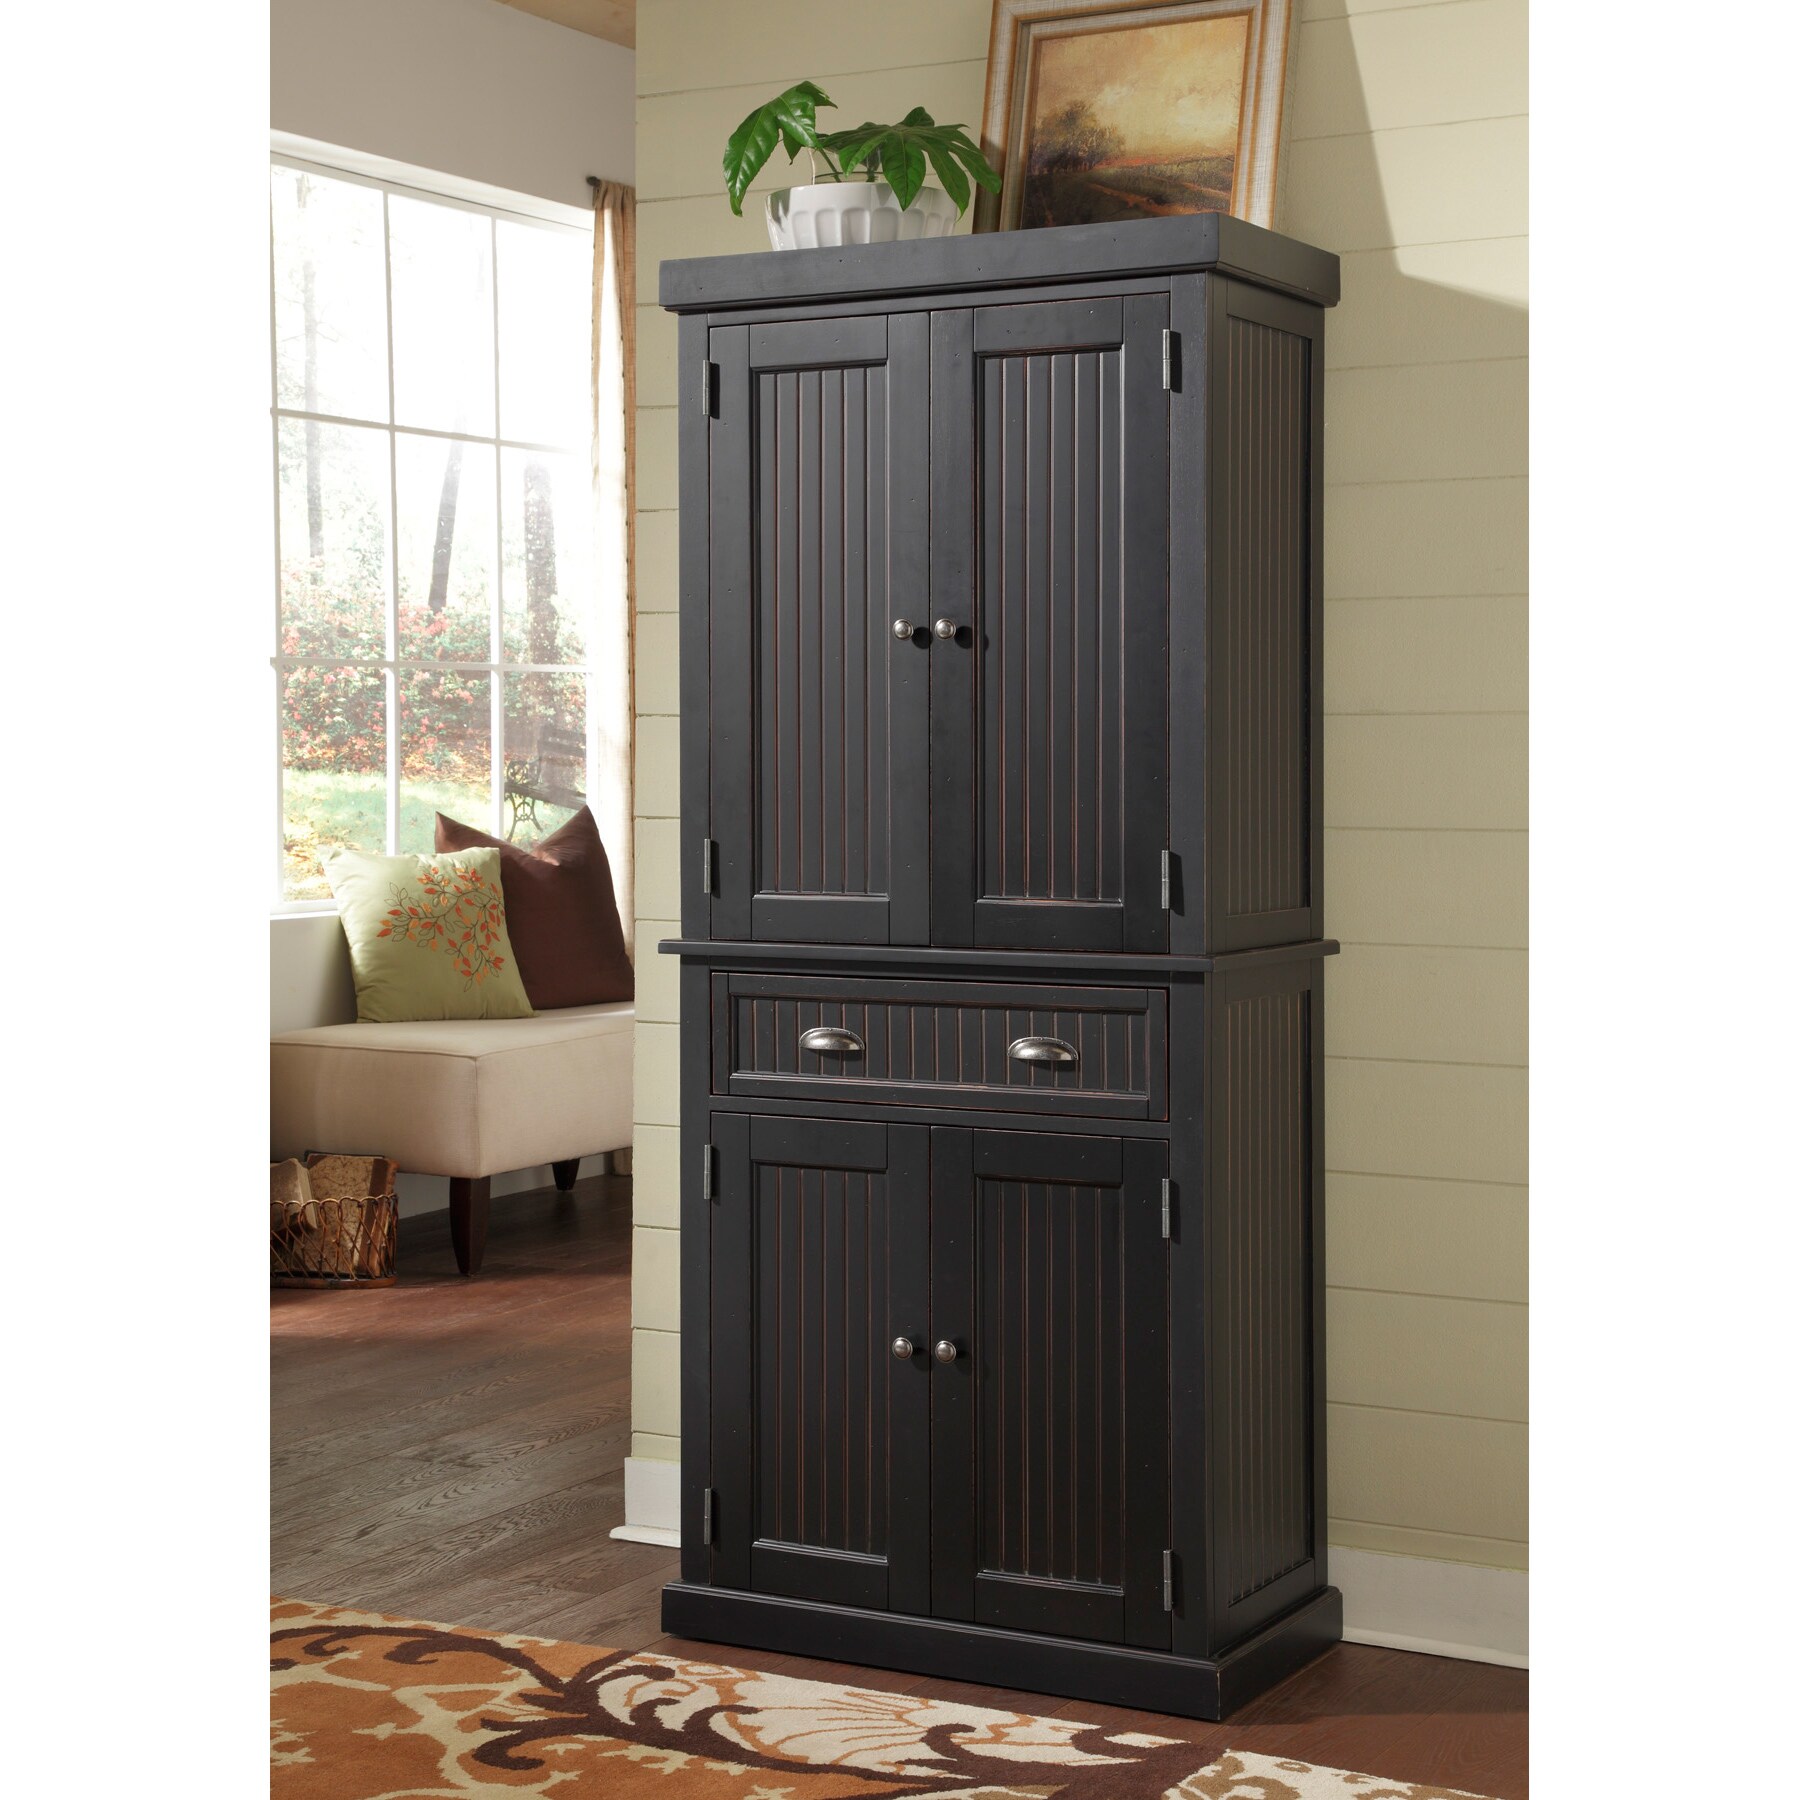 Shop Nantucket Black Distressed Finish Pantry By Home Styles On